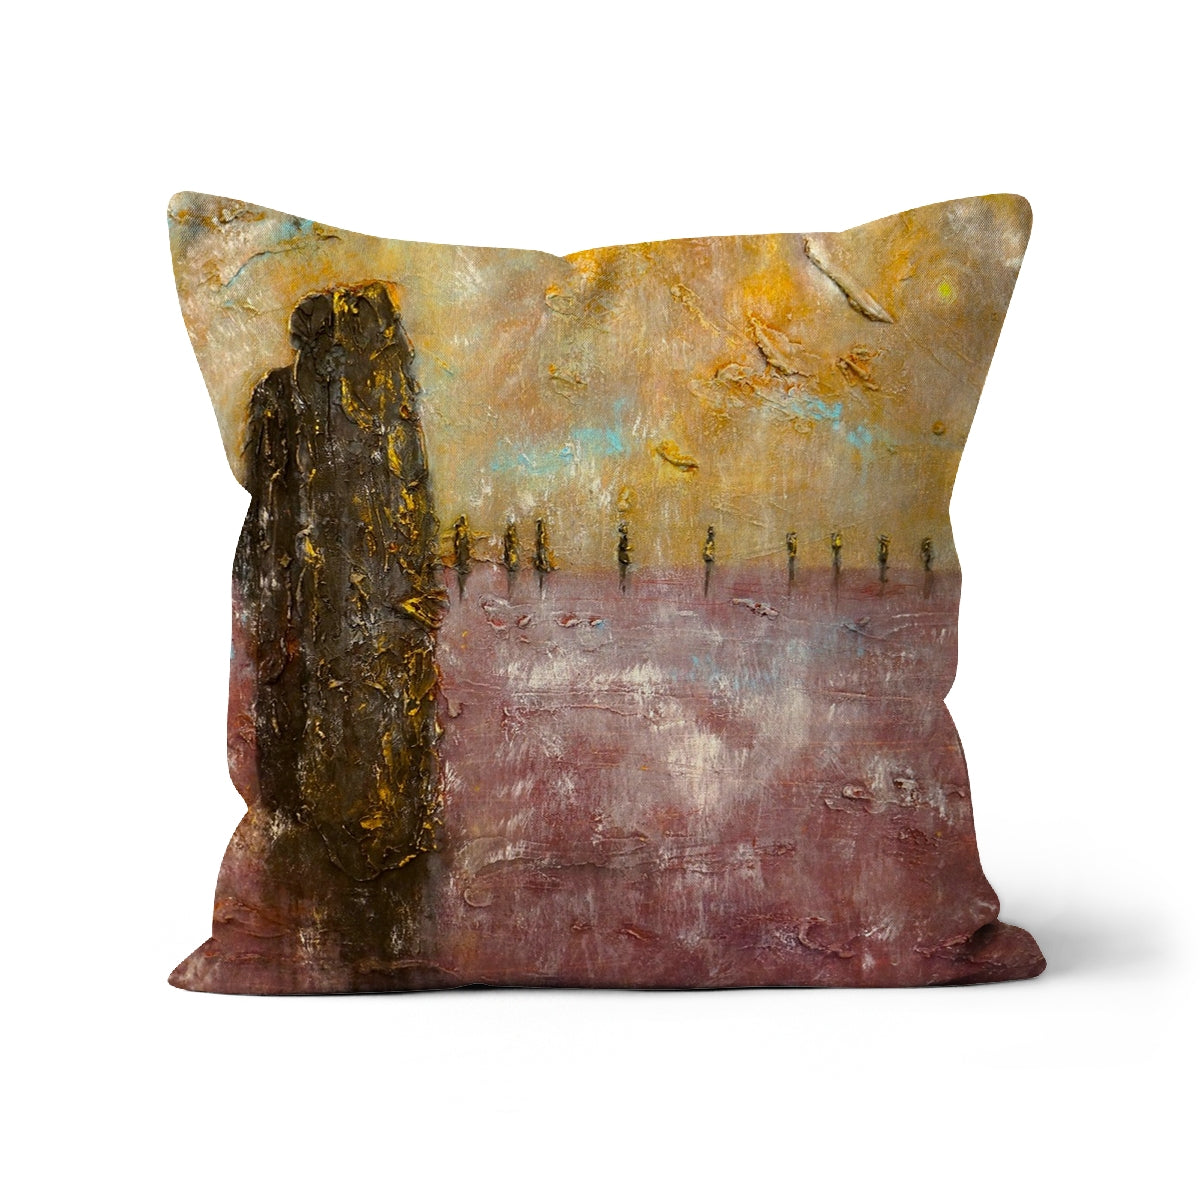 Bordgar Mist Orkney Art Gifts Cushion-Cushions-Orkney Art Gallery-Linen-22"x22"-Paintings, Prints, Homeware, Art Gifts From Scotland By Scottish Artist Kevin Hunter